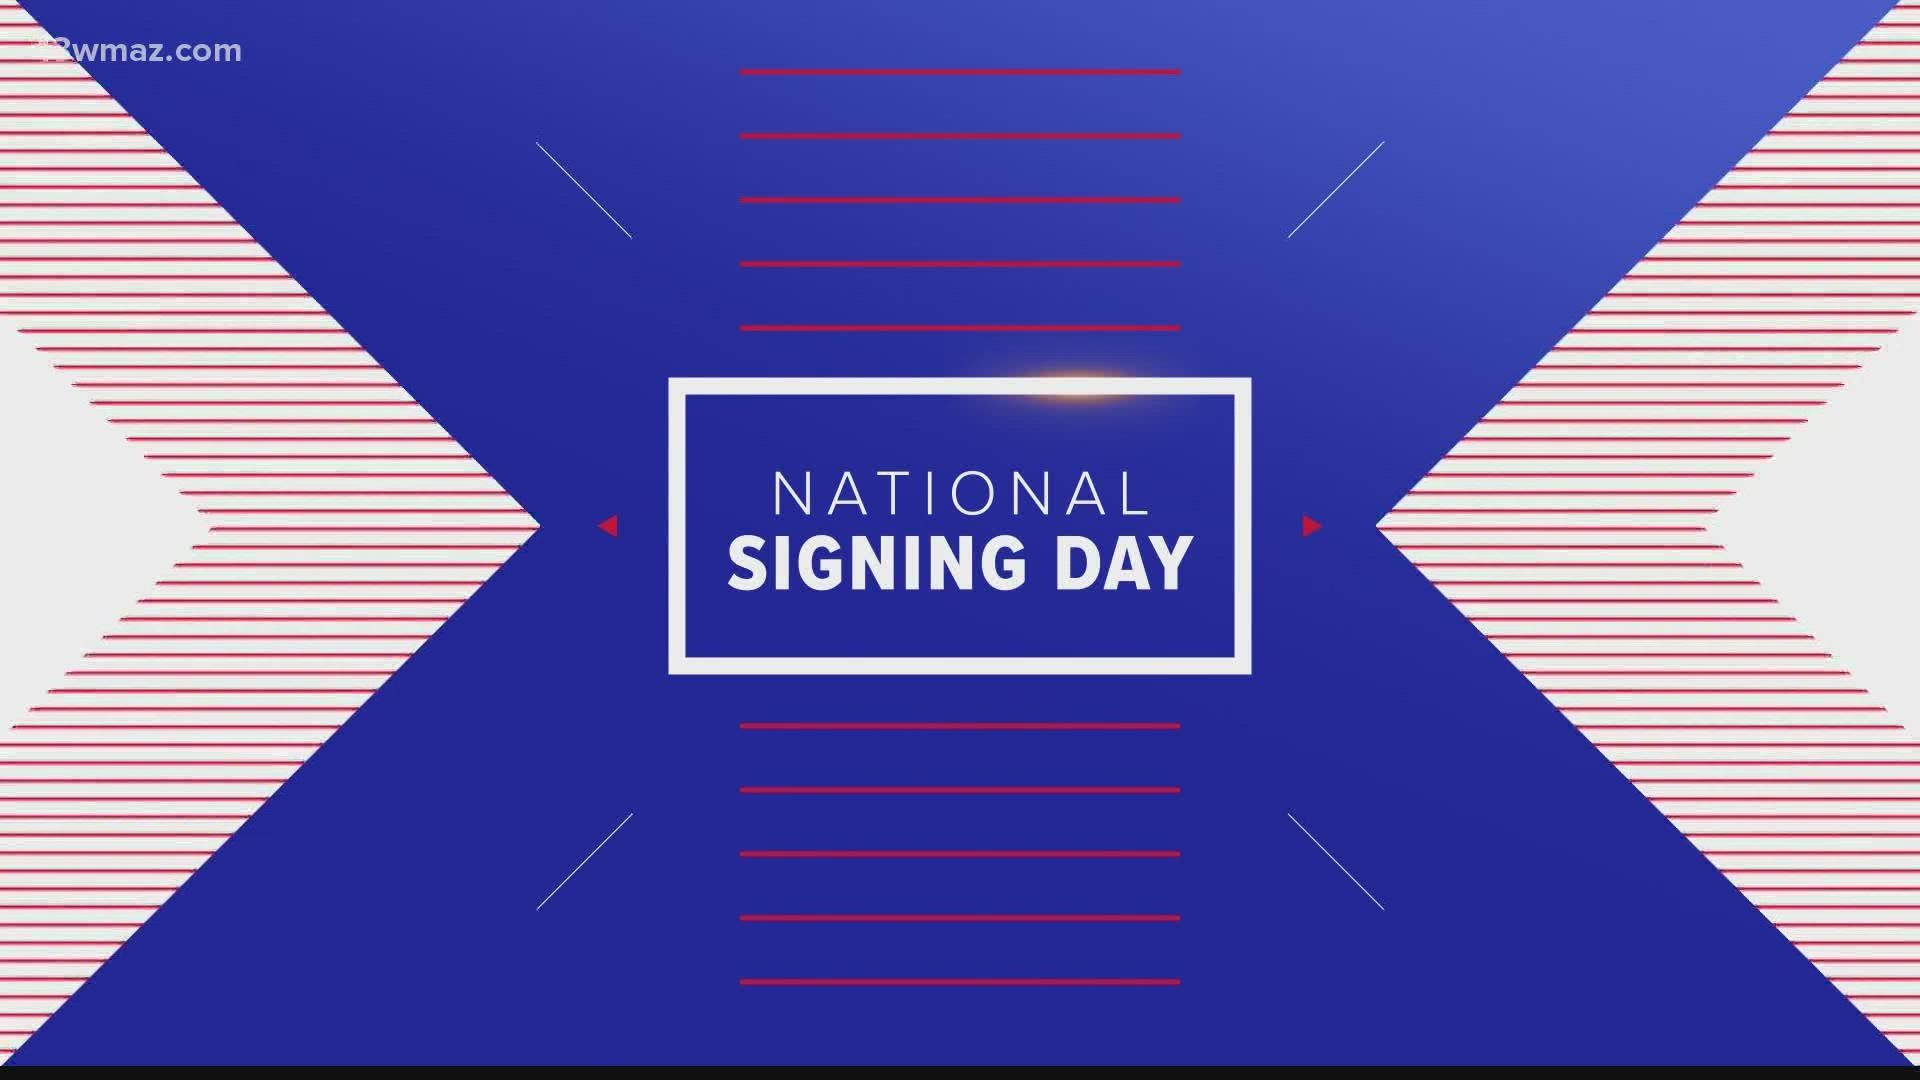 13WMAZ is your place to follow Central Georgia stars on Early Signing Day